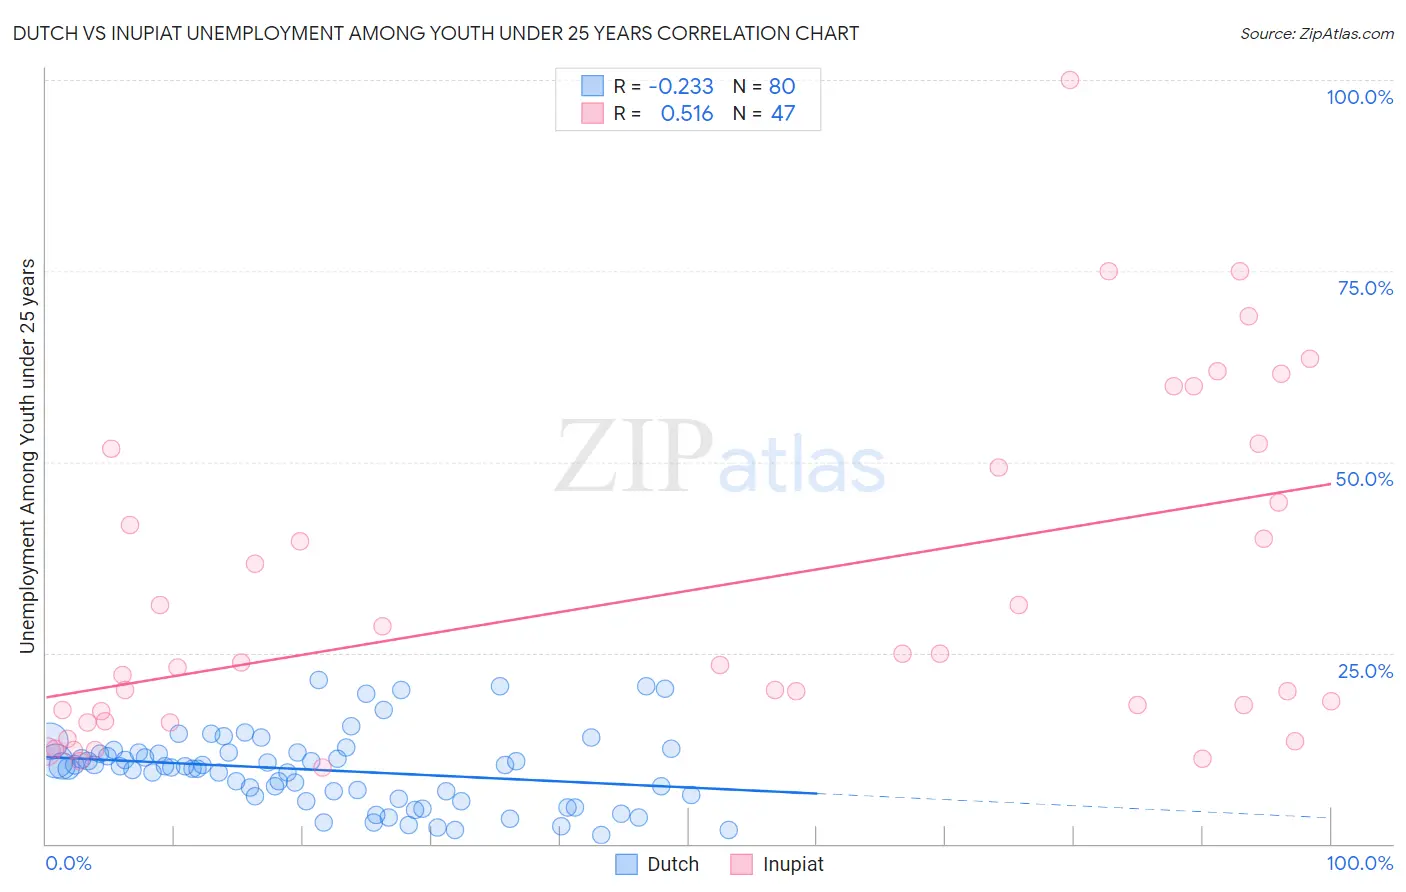 Dutch vs Inupiat Unemployment Among Youth under 25 years